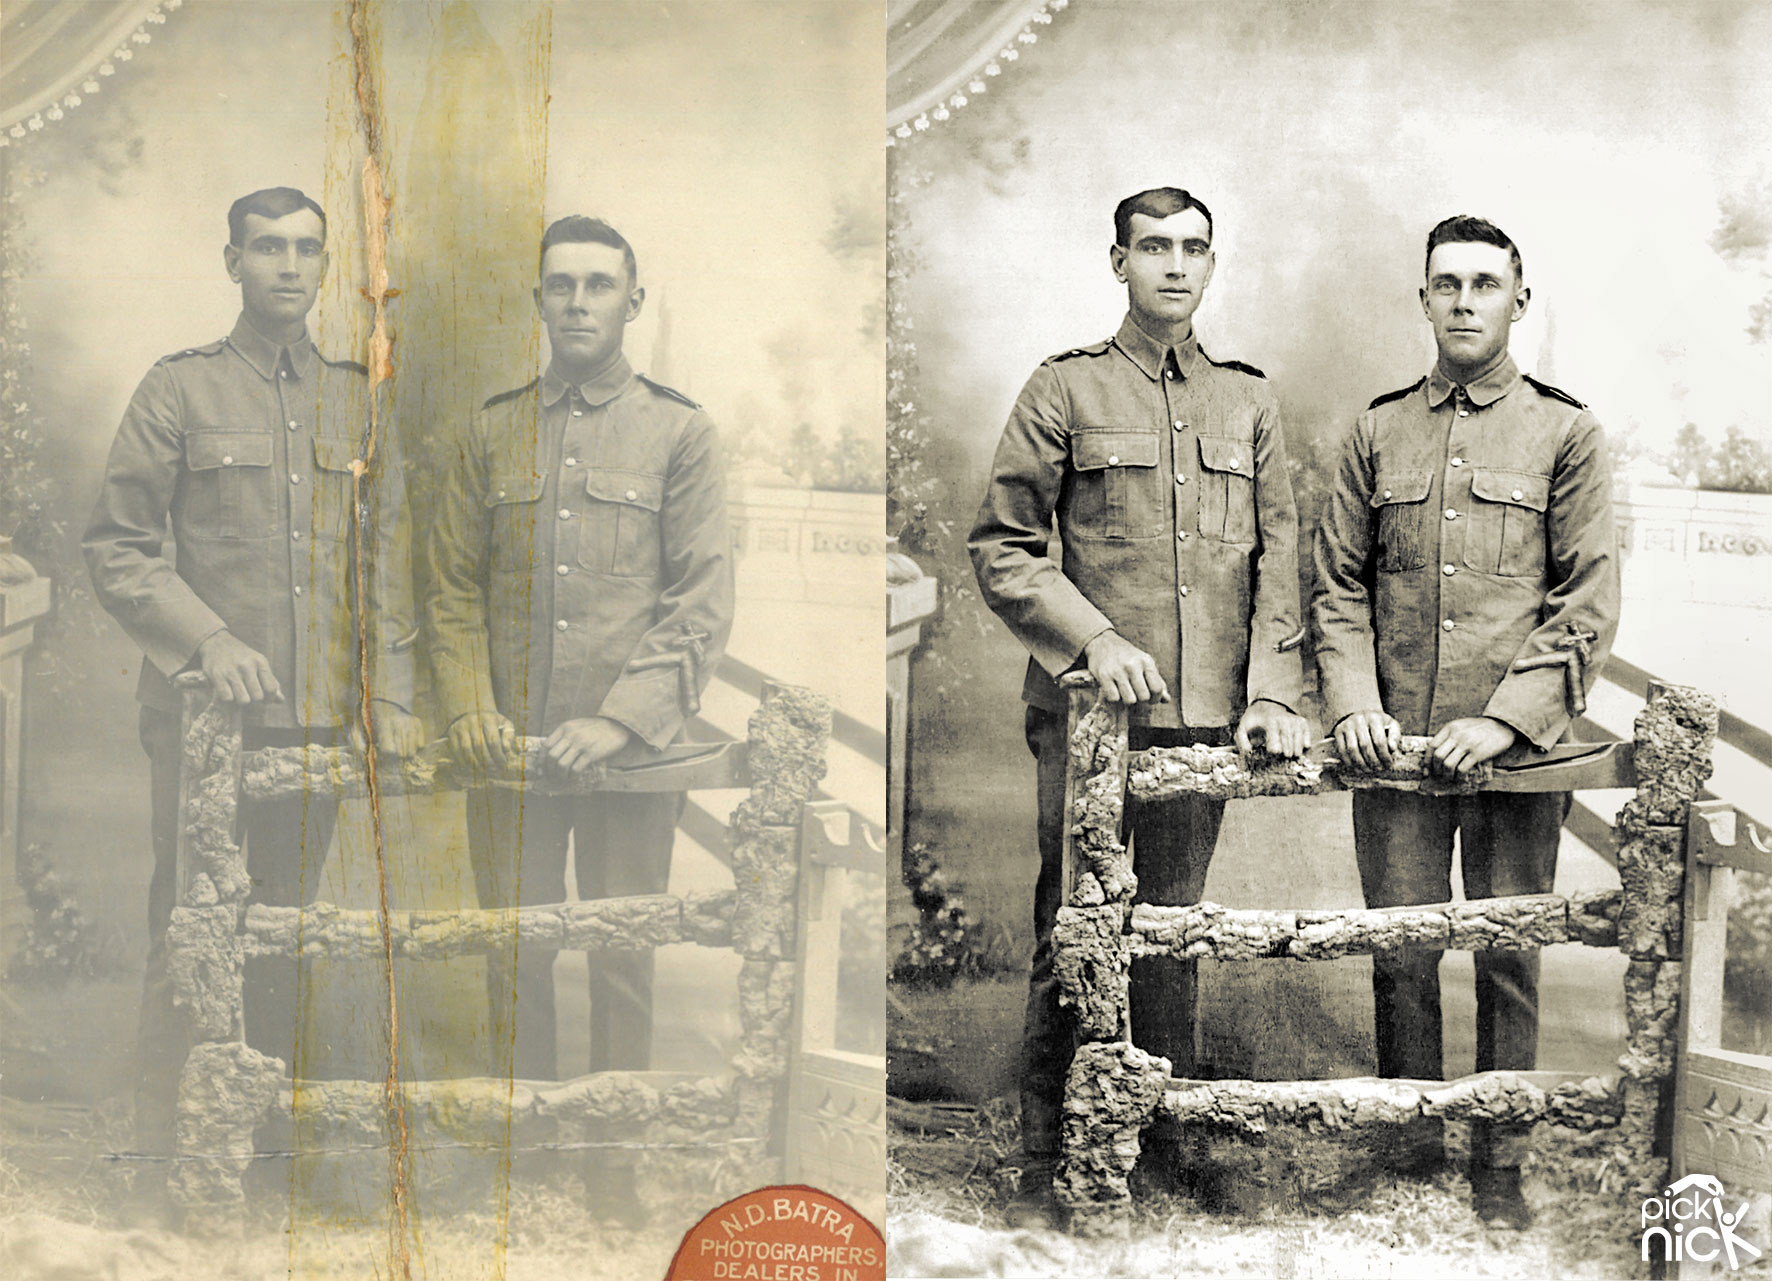 An old photo torn in half, pieced back together and restored